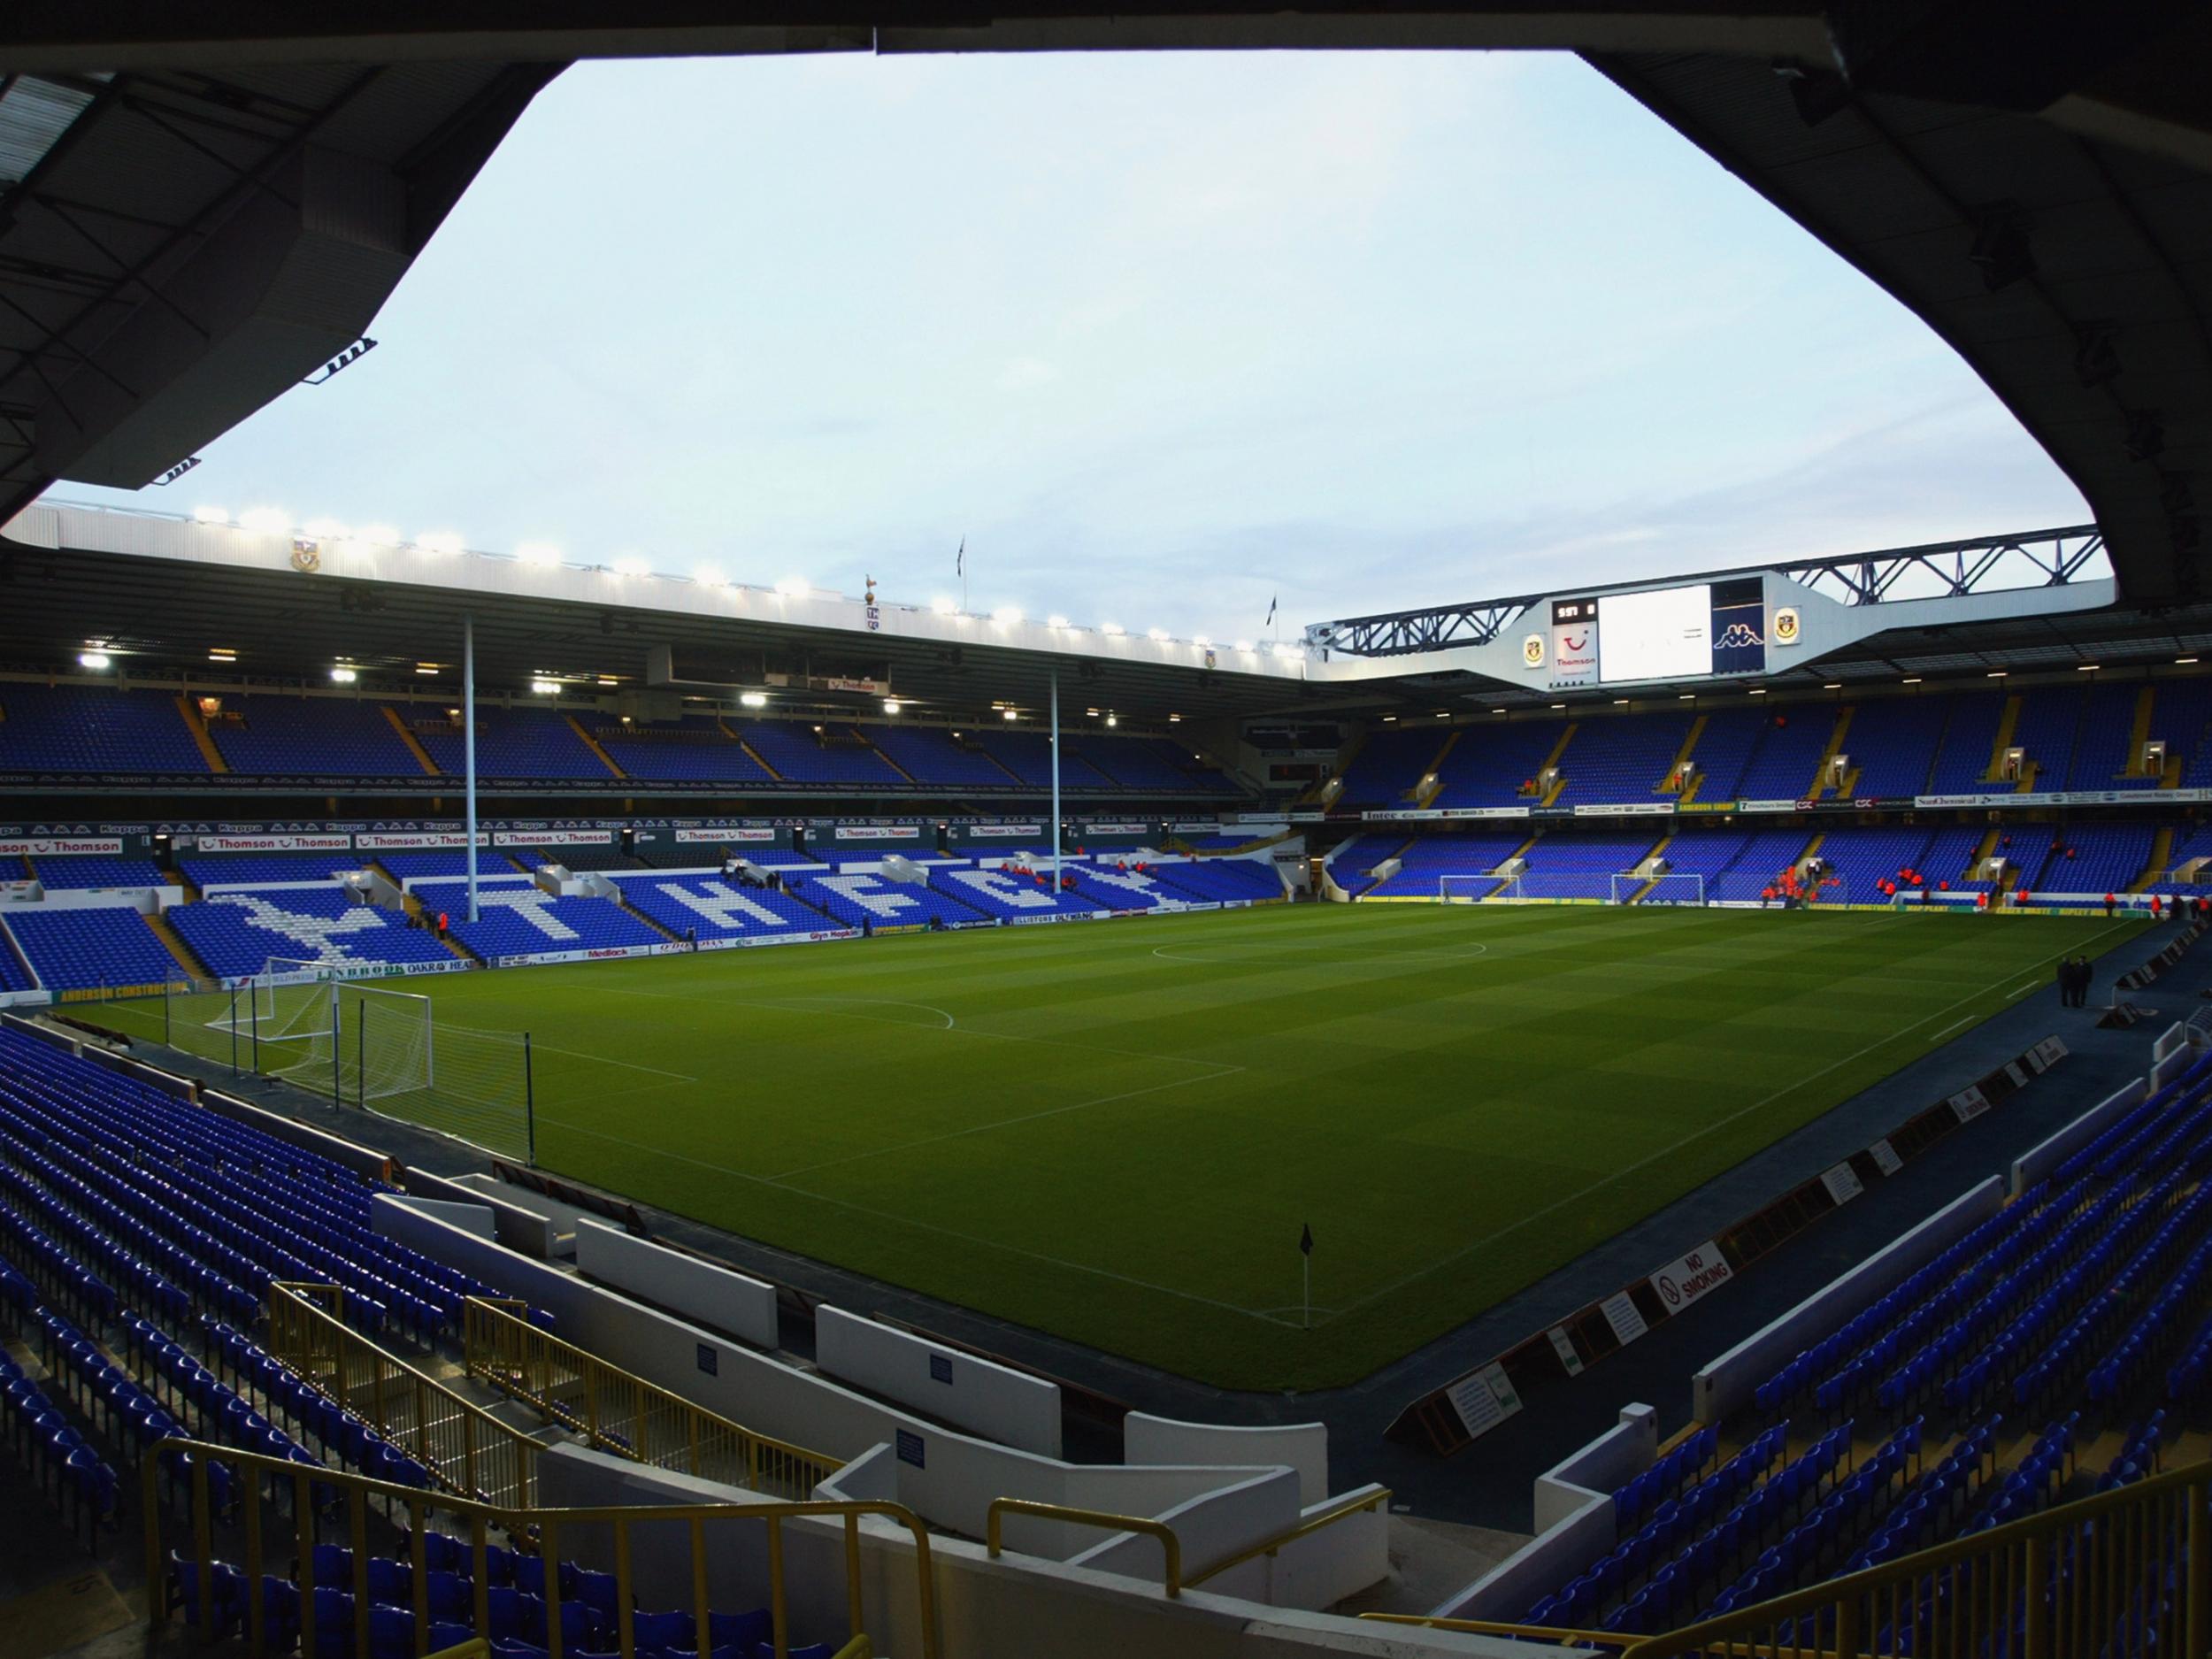 After 118 years, Tottenham will finally leave White Hart Lane